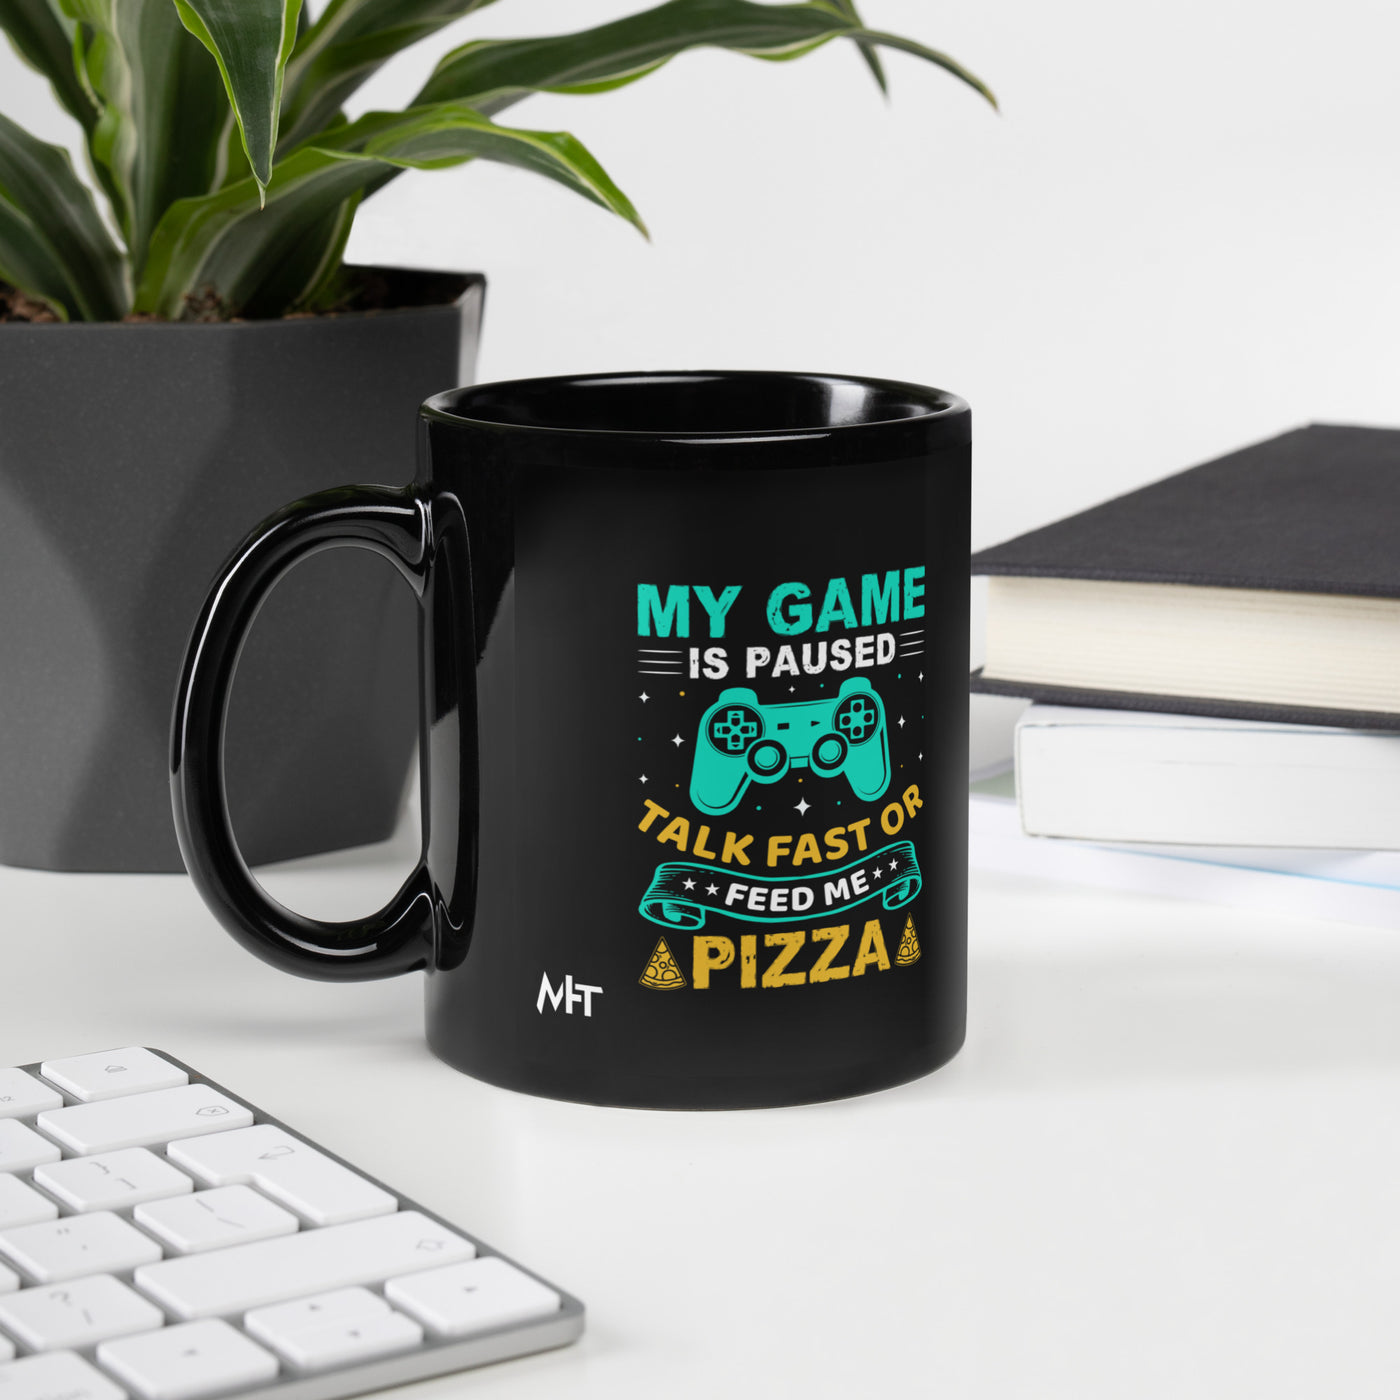 My Game is Paused, Talk Fast or Feed me Pizza - Black Glossy Mug